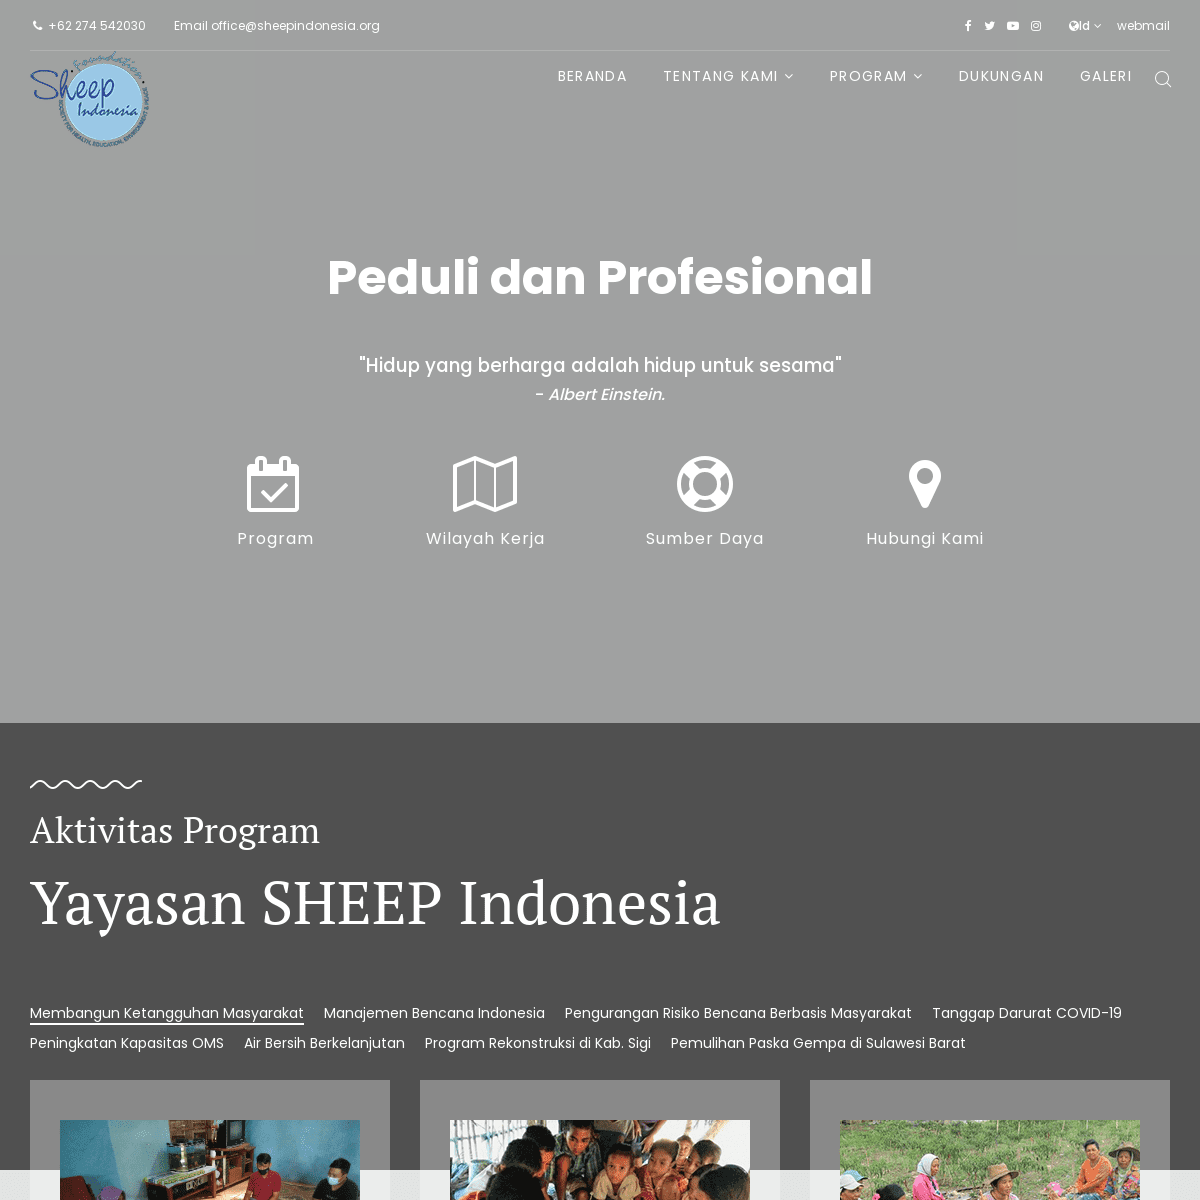 A complete backup of https://sheepindonesia.org